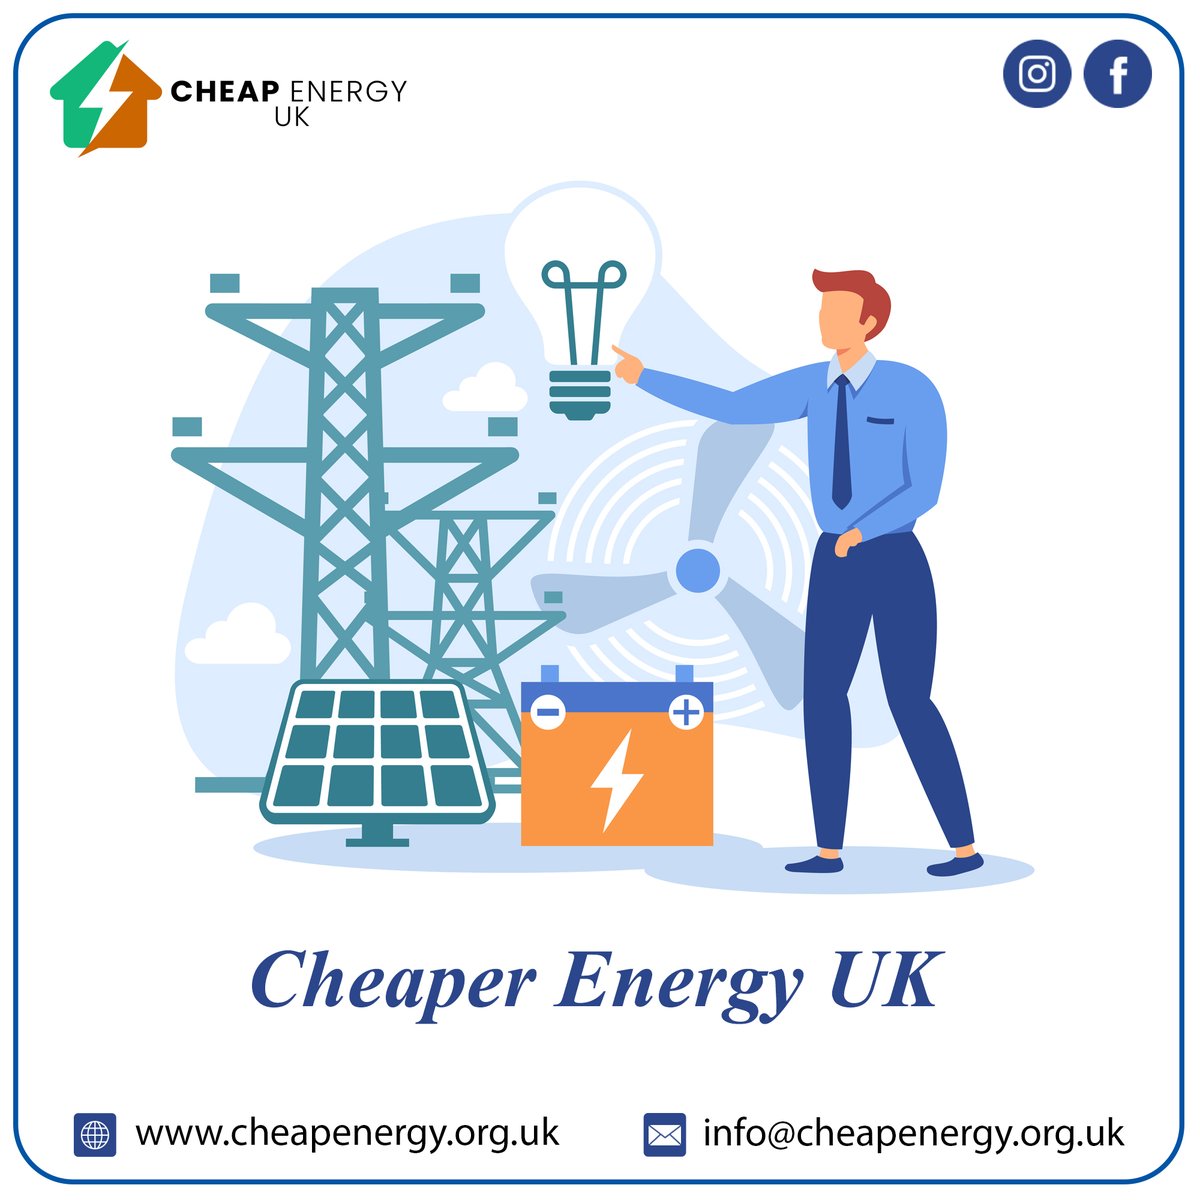 𝘽𝙪𝙮 𝘾𝙝𝙚𝙖𝙥𝙚𝙧 𝙀𝙣𝙚𝙧𝙜𝙮 𝘿𝙚𝙖𝙡𝙨 𝙞𝙣 𝙐𝙆!!

The UK has seen a rapid rise in energy cost that are coming down slightly in July, Cheapenergy UK will still have the best deals to help consumers minimise their energy costs.
#lowerbills #savemoney #energysupplier